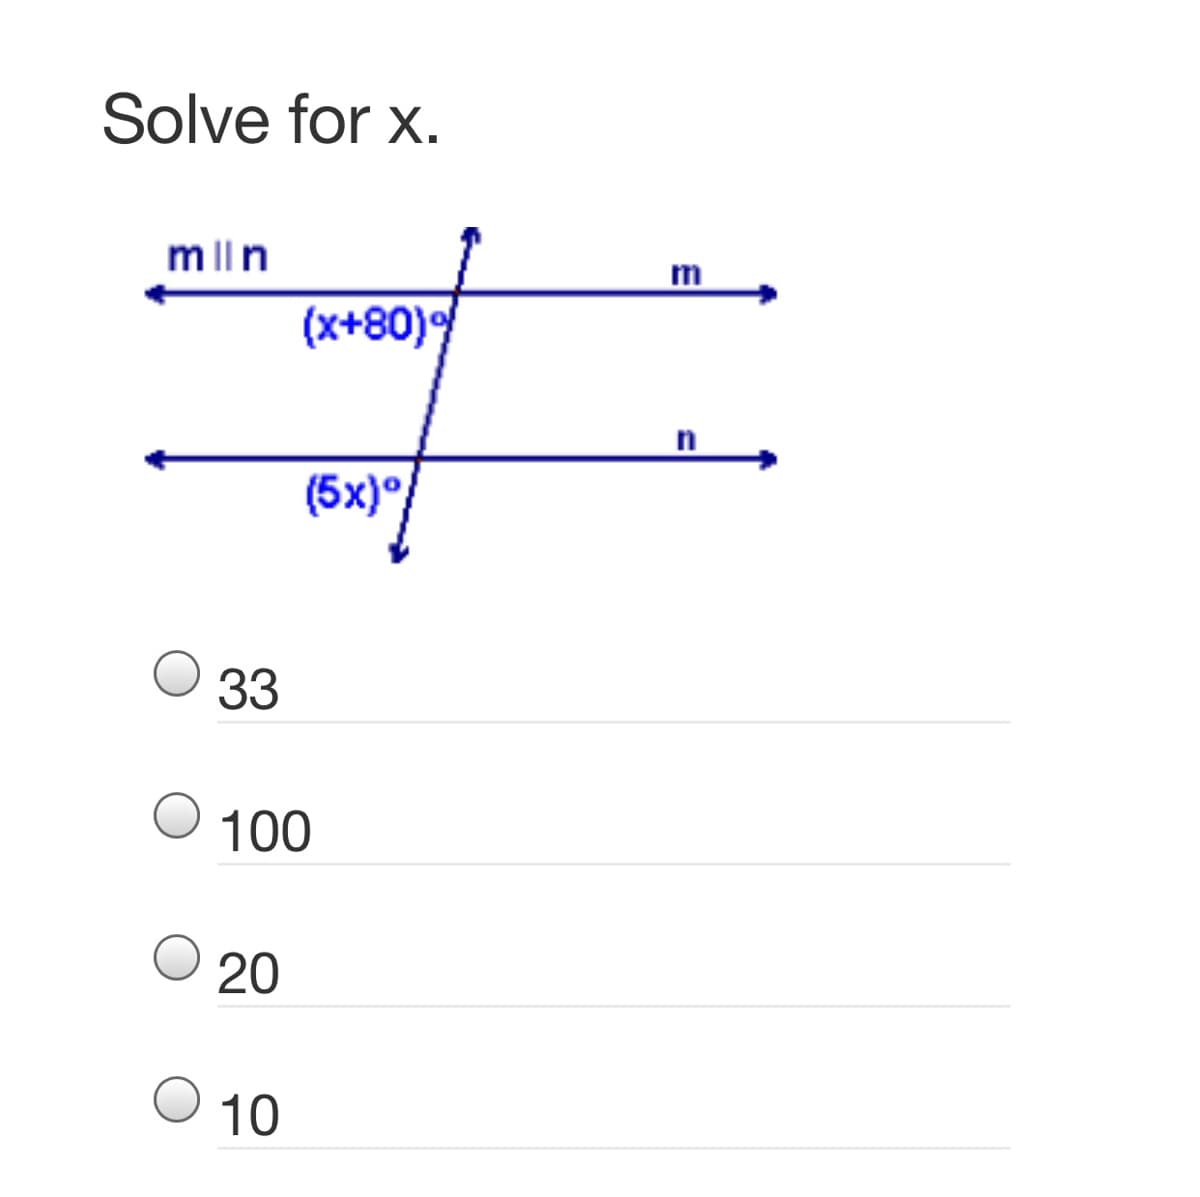 Solve for x.
mlln
m
(x+80)
(5x)°
33
100
20
10
